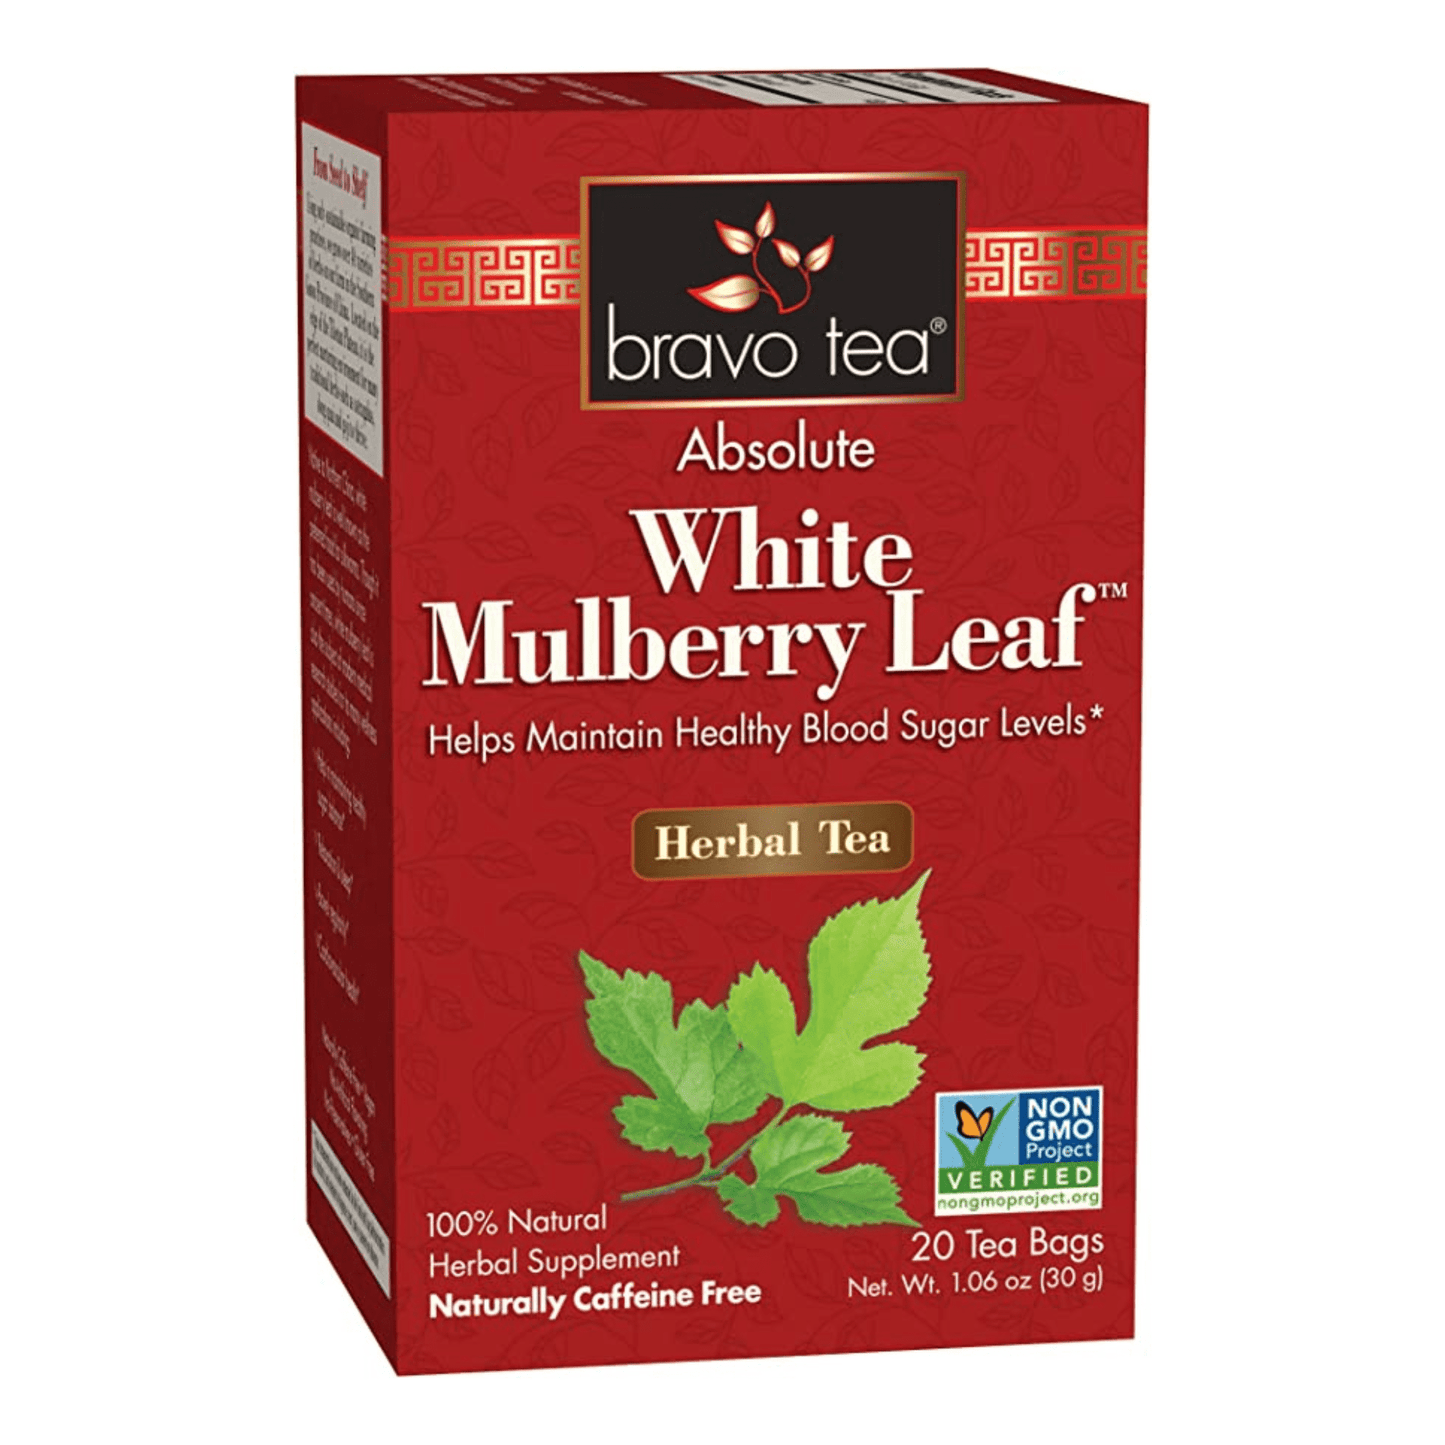 Primary Image of White Mulberry Leaf Tea Bags